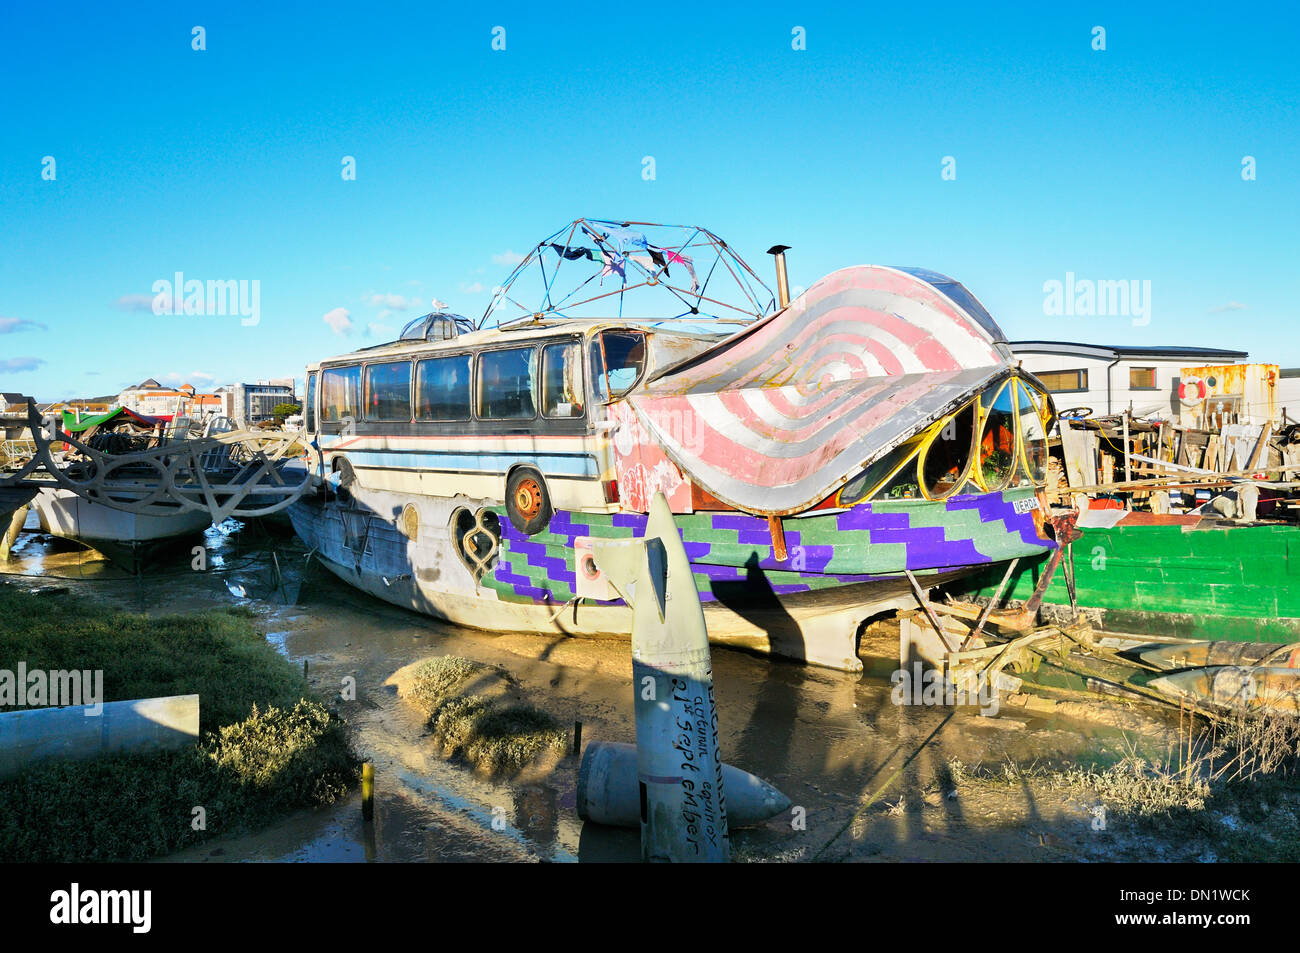 Houseboat on the banks of the river Adur, Shoreham-by-Sea, West Sussex, England, UK Stock Photo